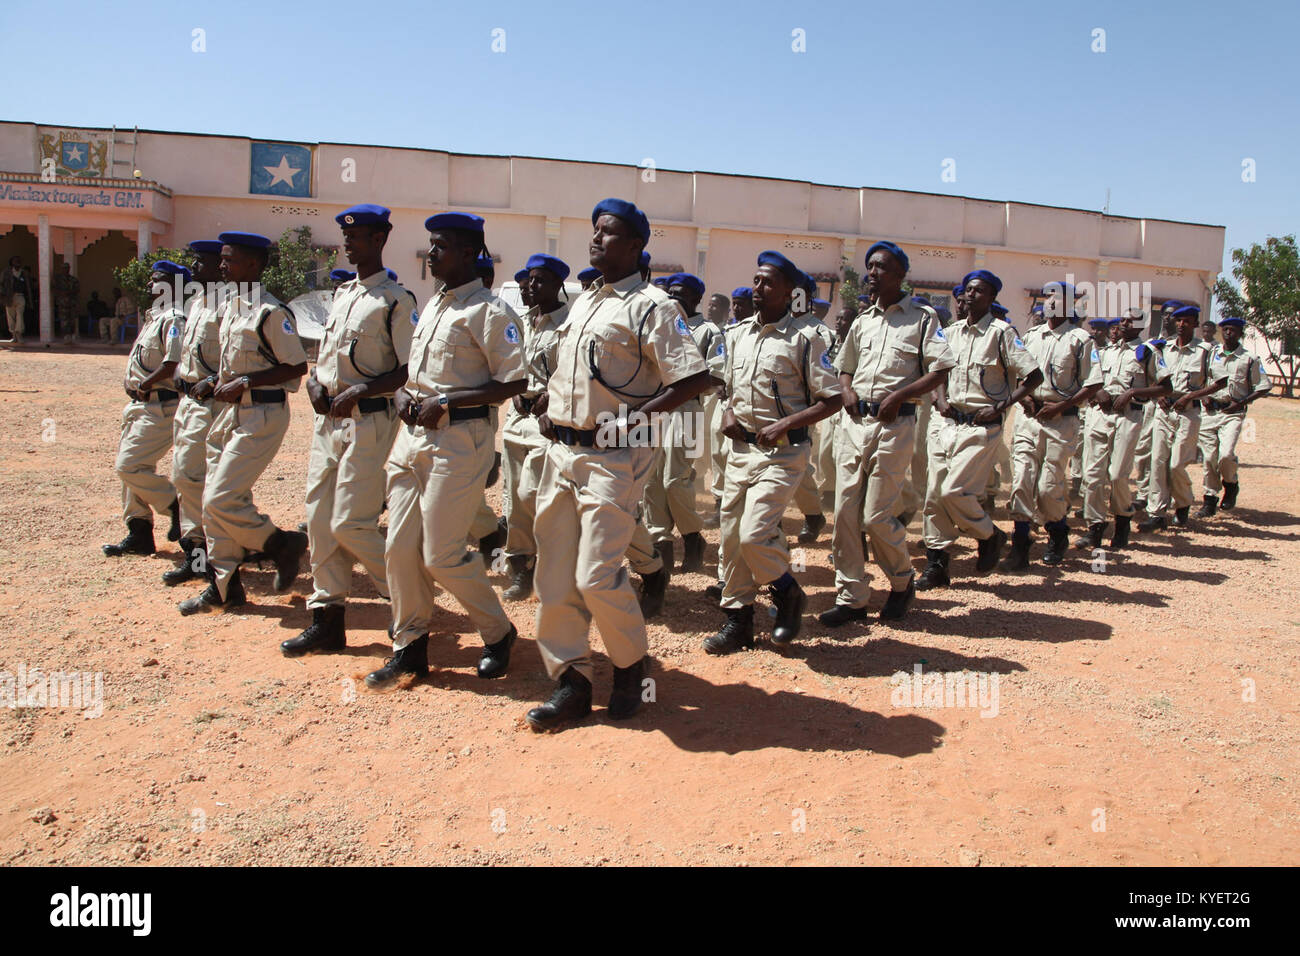 Police officers from Puntland and Galmudug State march at a parade mounted during the closing ceremony of a Joint Police Patrol Training conducted by AMISOM and UN officers in Gaalkacyo, Somalia on December 19, 2017. AMISOM Photo Stock Photo